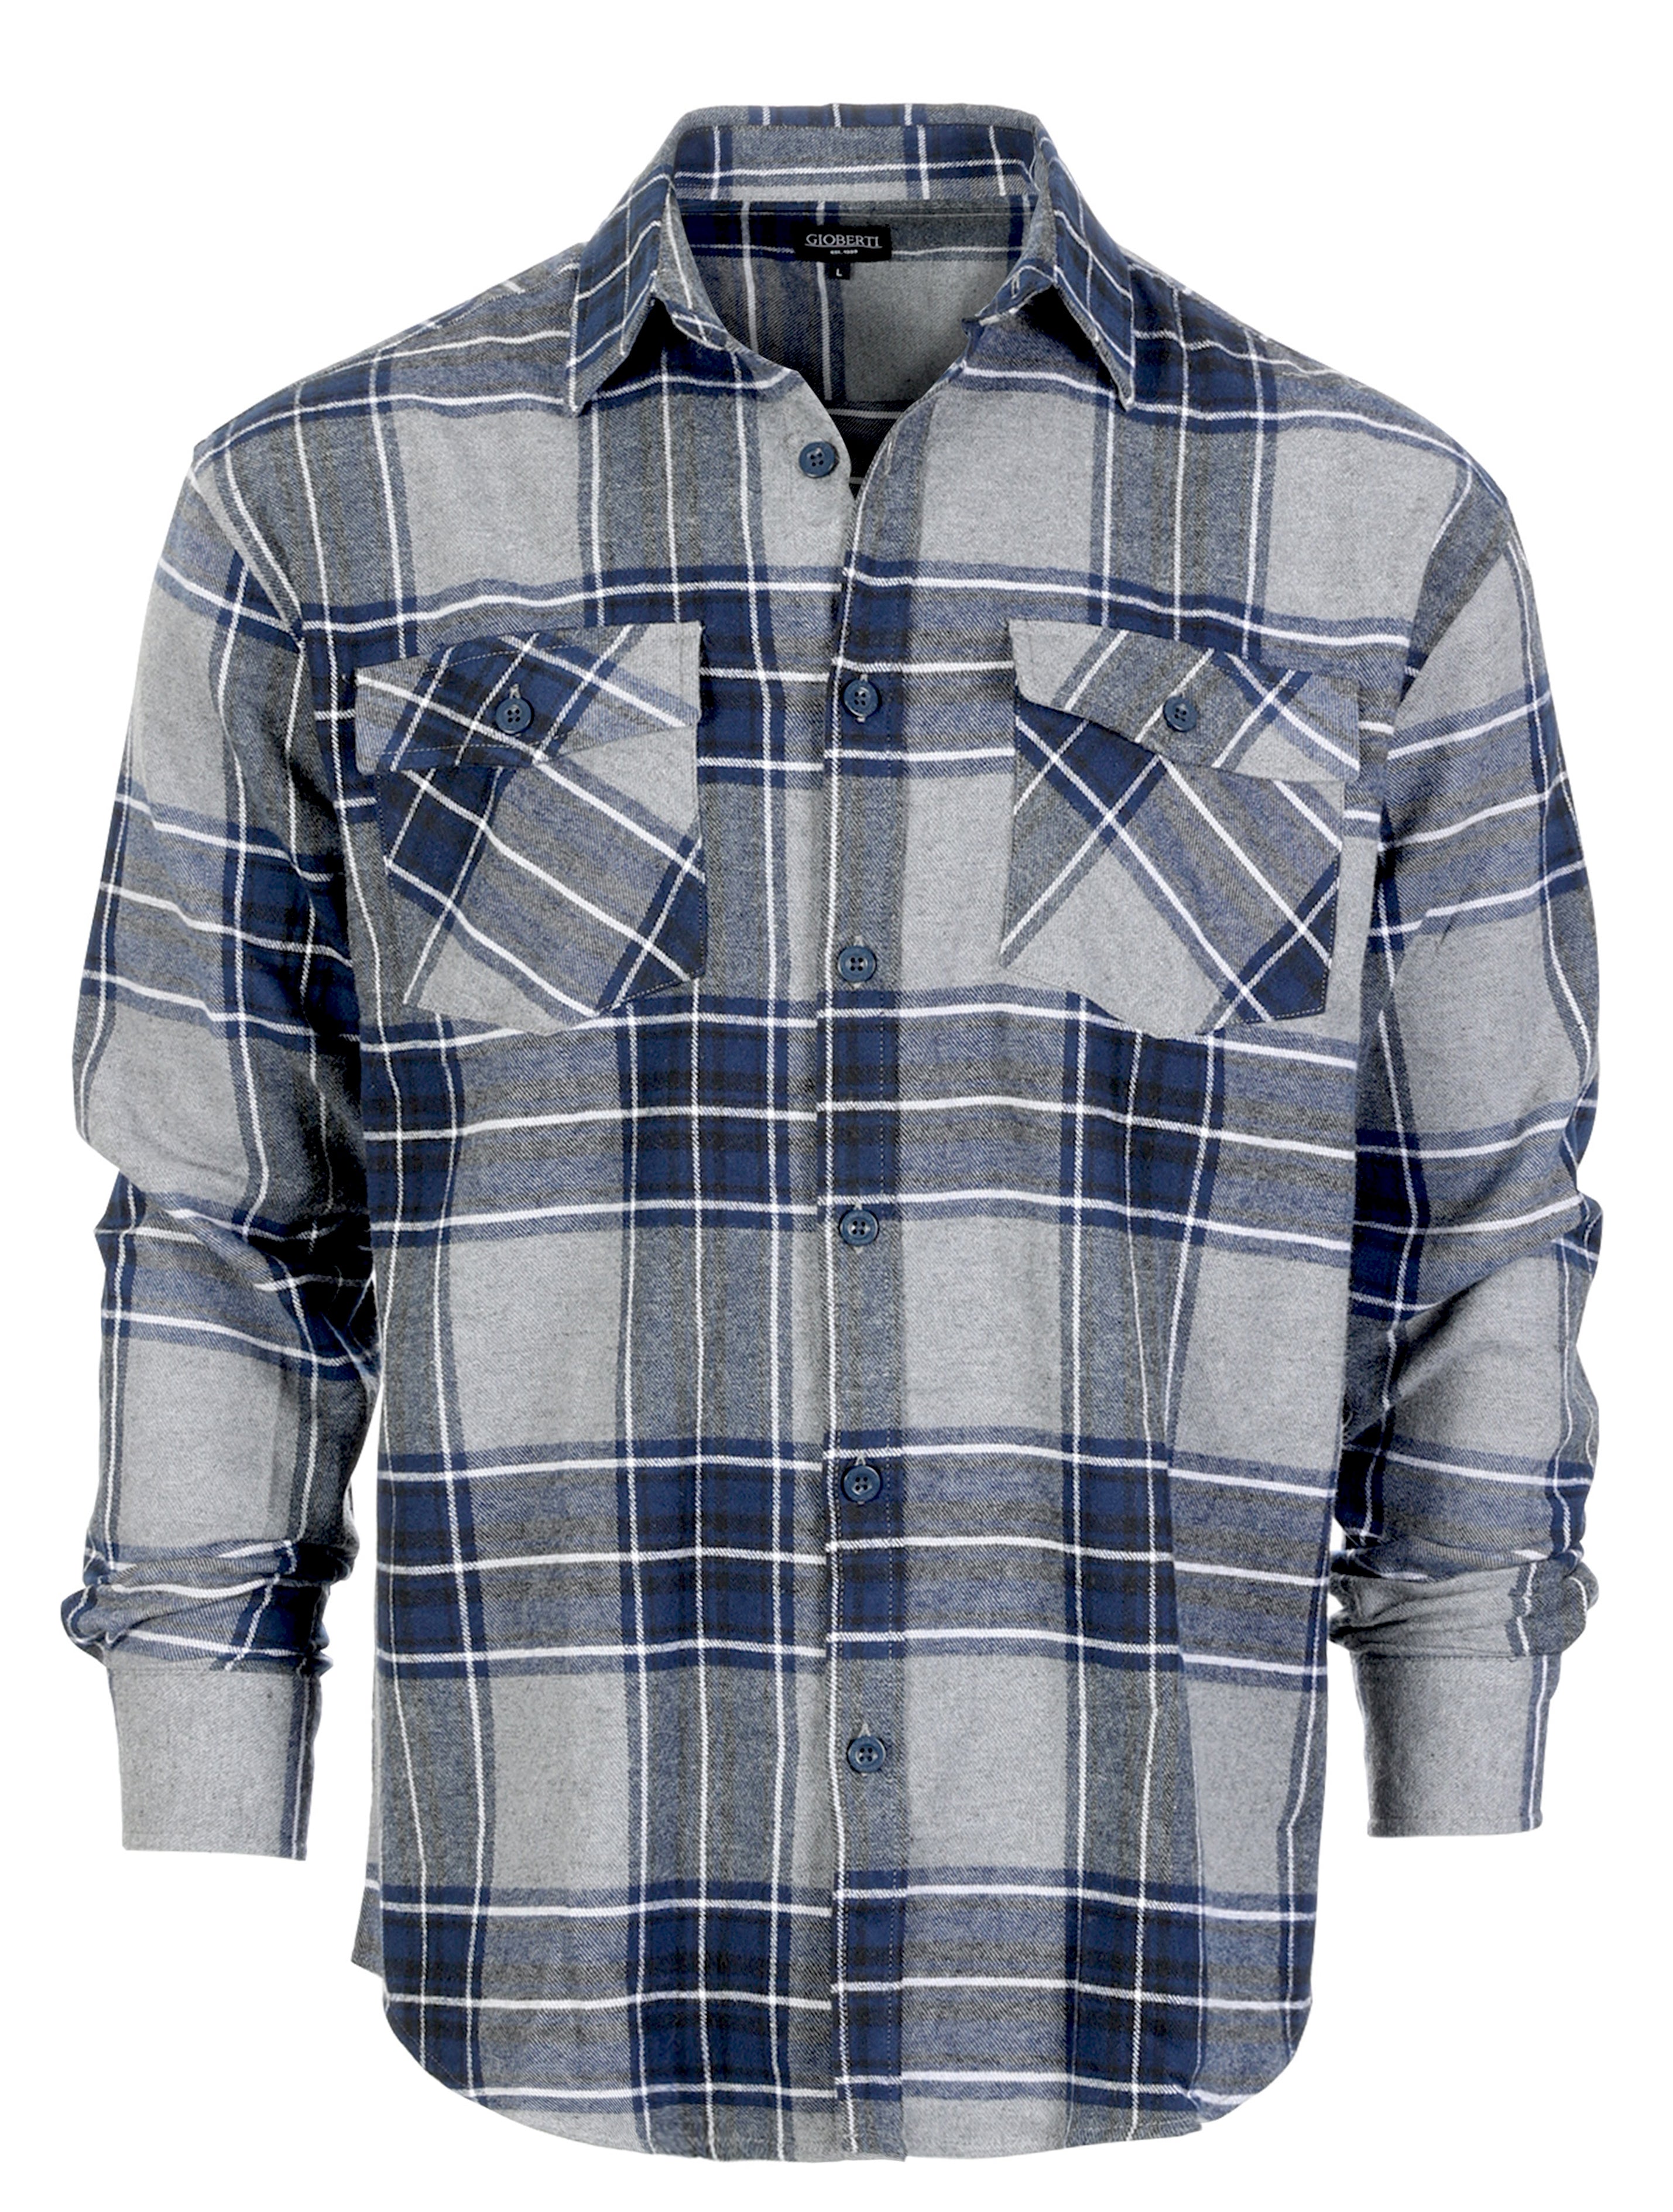 title:Gioberti Men's Gray / Navy / White Highlight Plaid Checkered Brushed Flannel Shirt;color:Gray / Navy / White Highlight